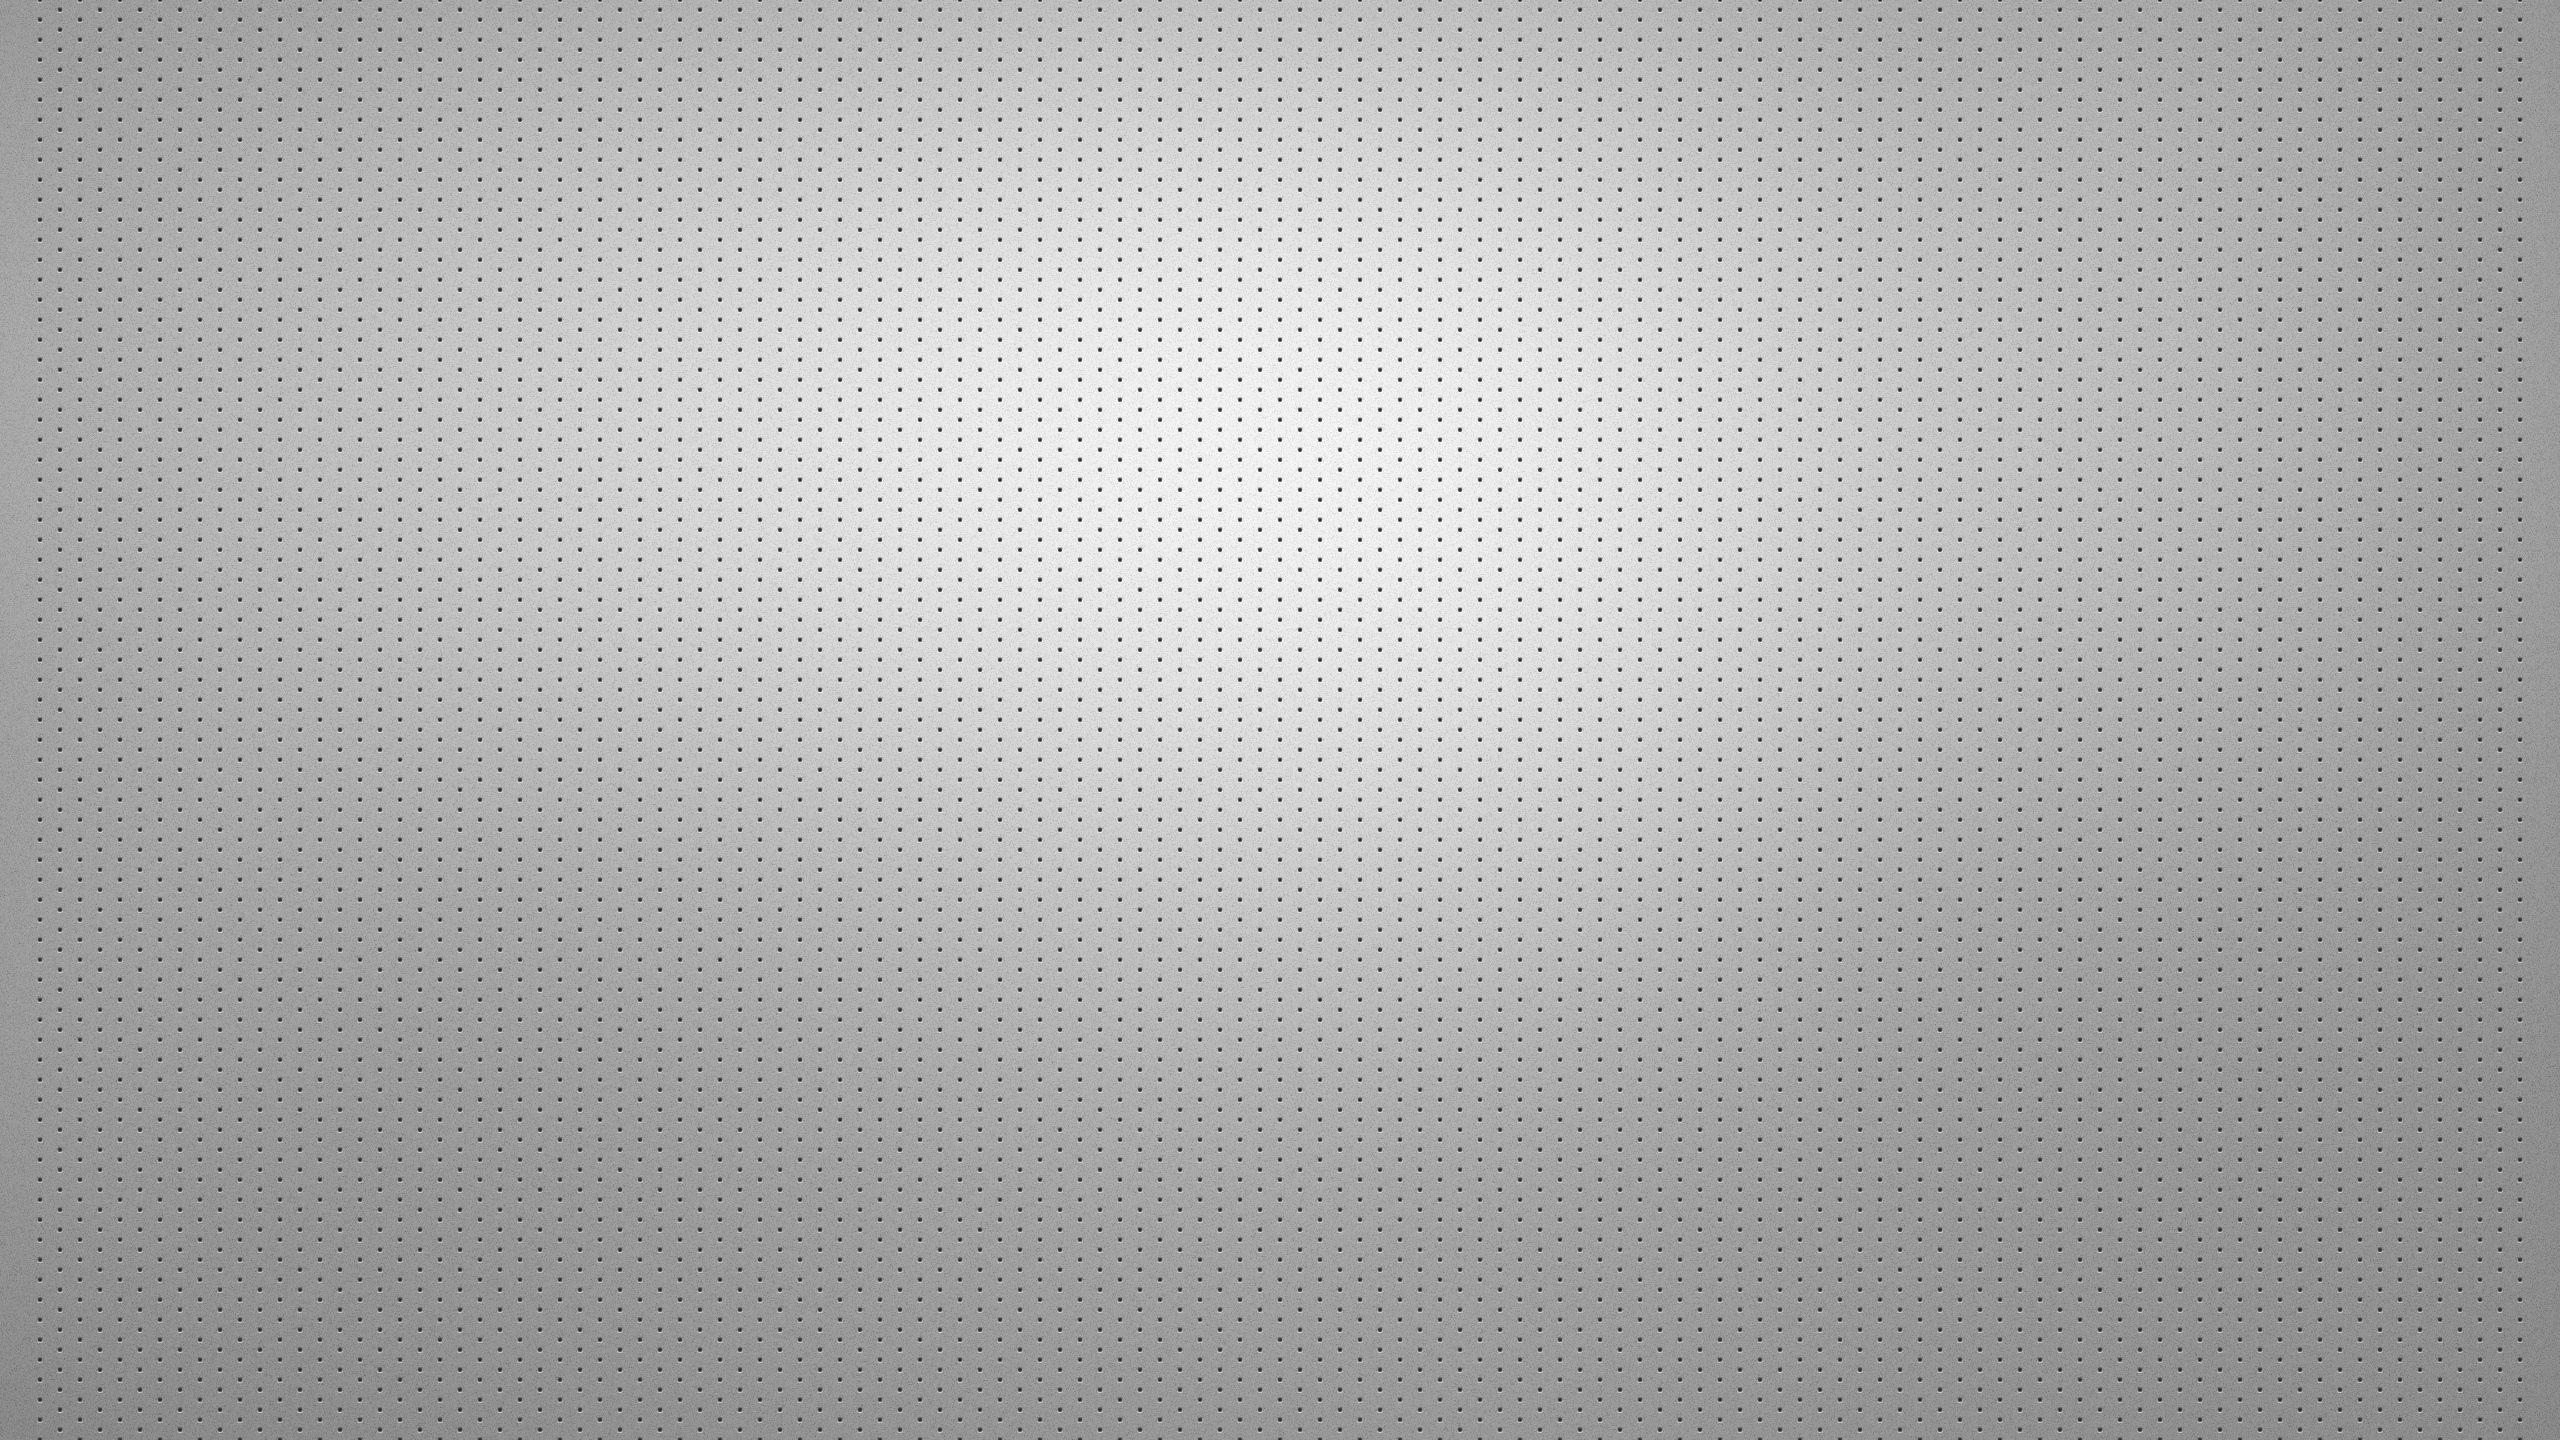 Download wallpaper 2560x1440 mesh, points, background, silver widescreen 16:9 HD background